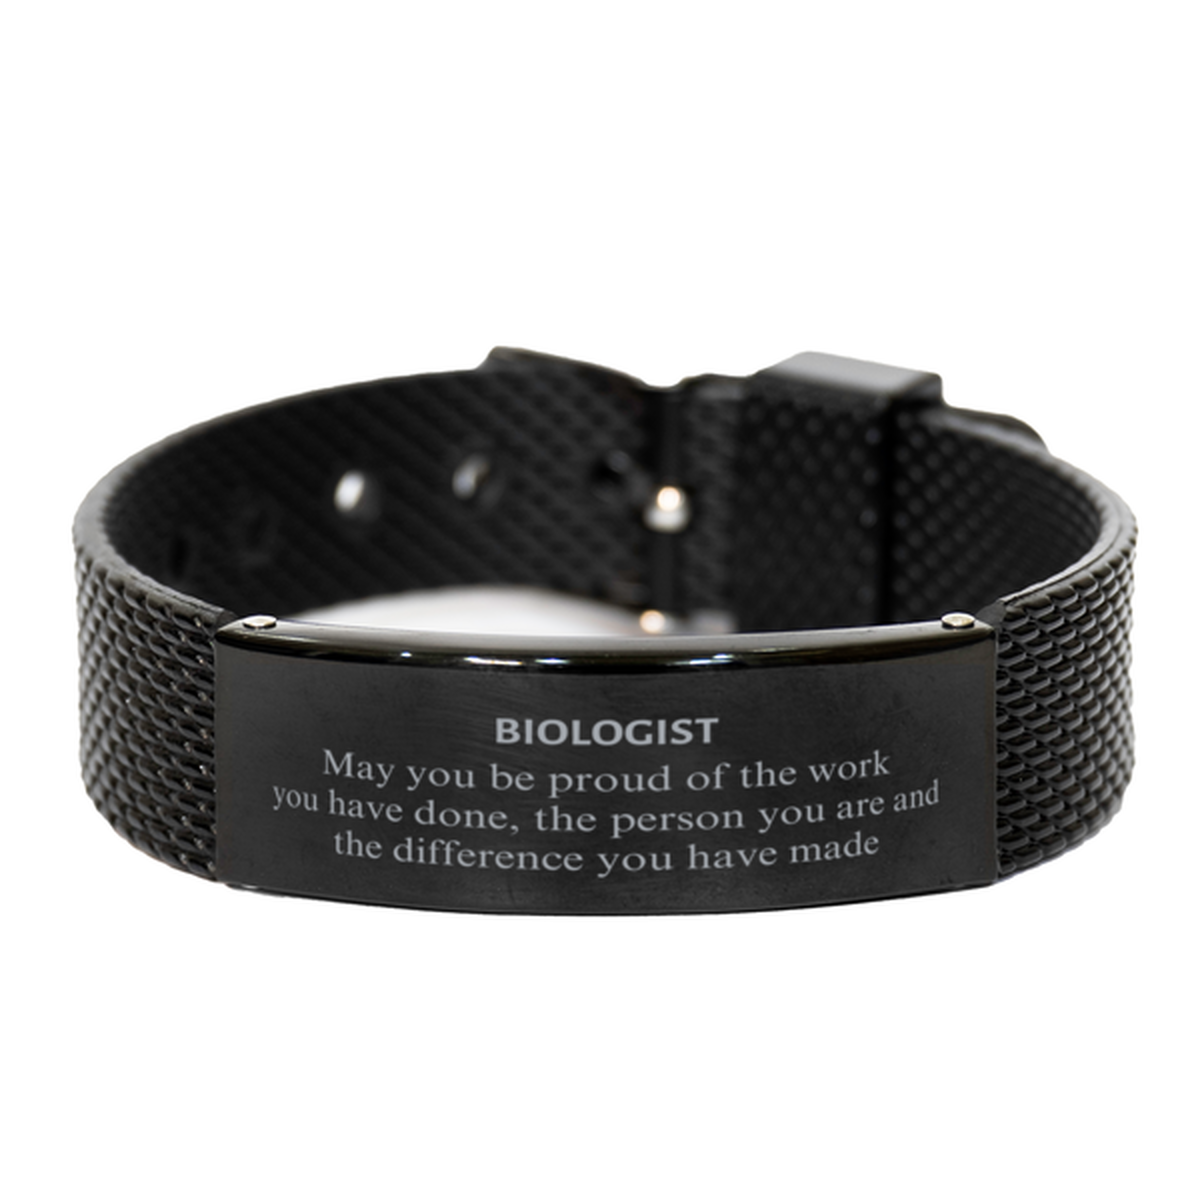 Biologist May you be proud of the work you have done, Retirement Biologist Black Shark Mesh Bracelet for Colleague Appreciation Gifts Amazing for Biologist